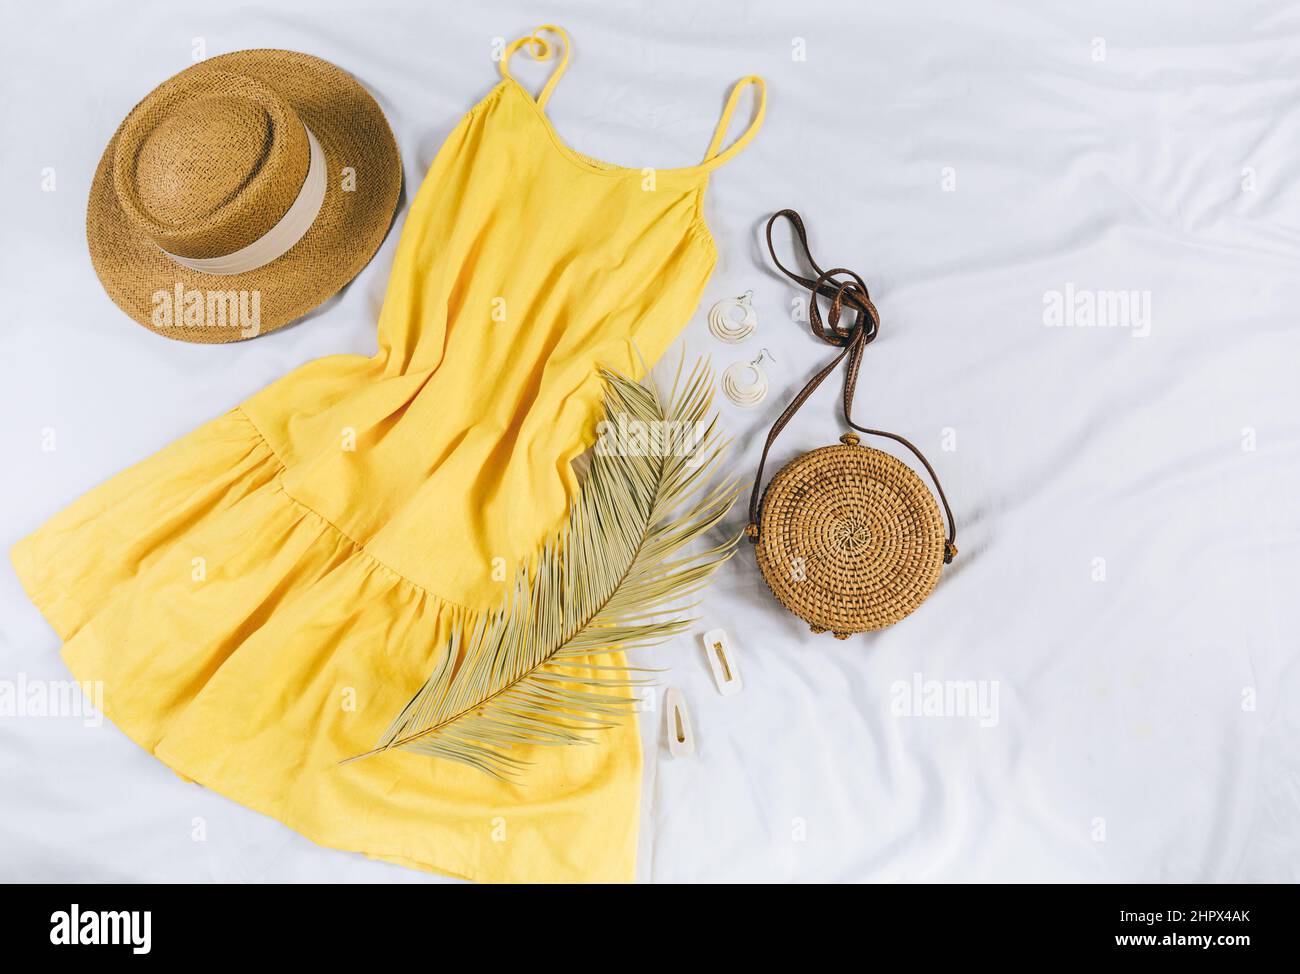 Straw hat, yellow dress, straw bag on white background. Trendy summer outfit. Flat lay with clothes for holidays and vacations. Stock Photo